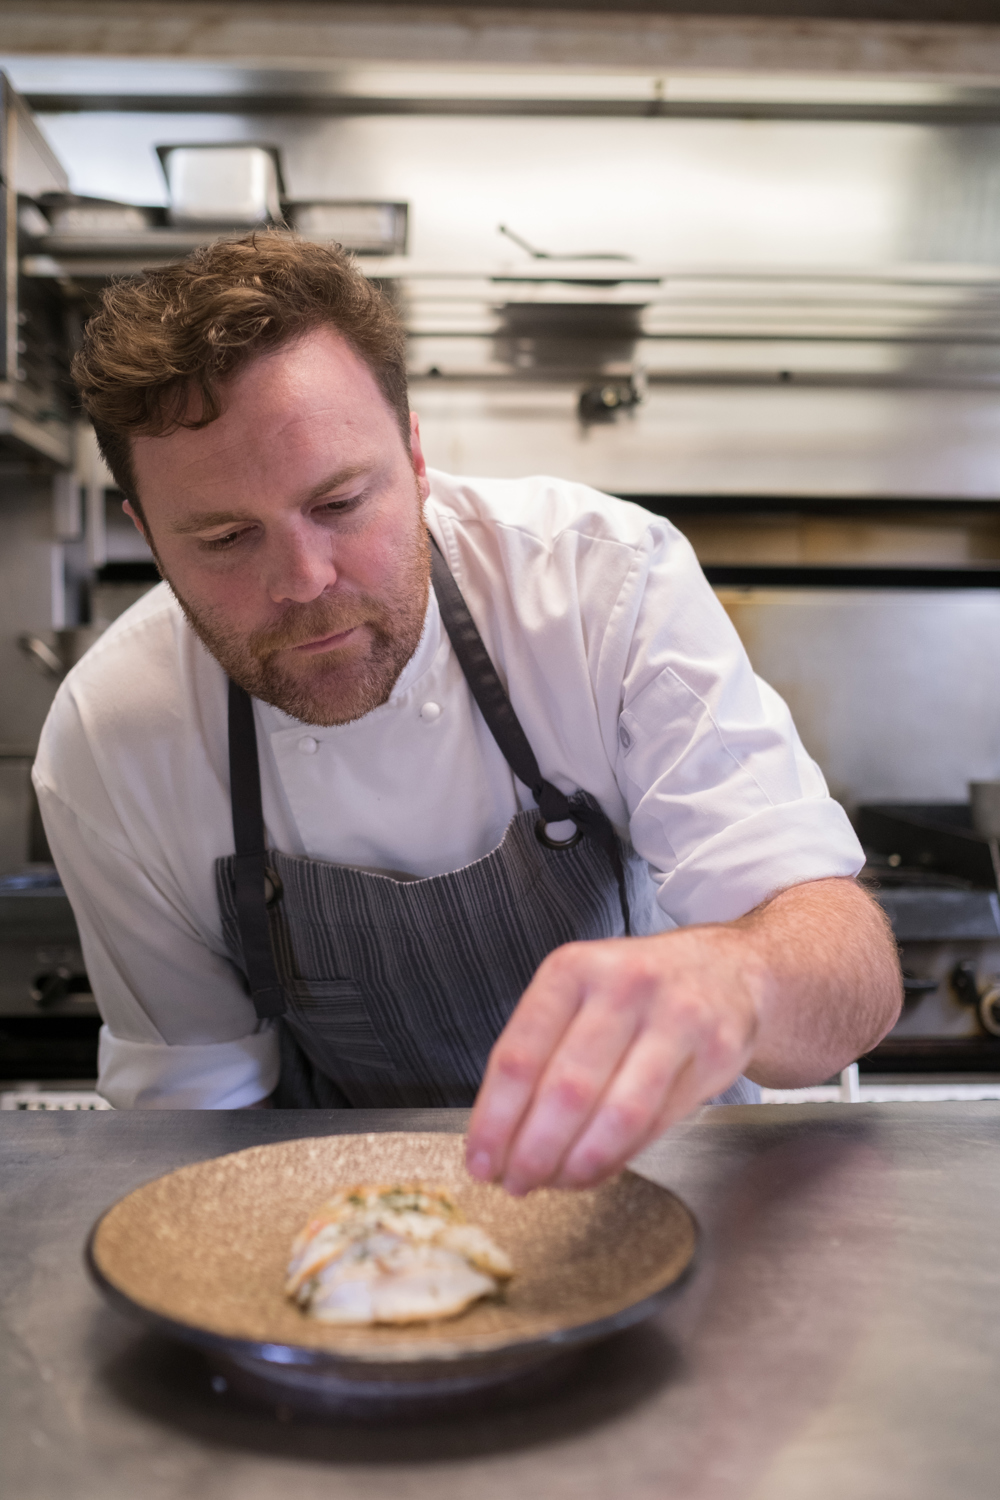 AWARD-winning chef Ryan Sessions made his mark on the region in 2010 when he was at the Merrijig Inn, winning Regional Restaurant of the Year and being awarded two chef’s hats in The Age Good Food Guide.